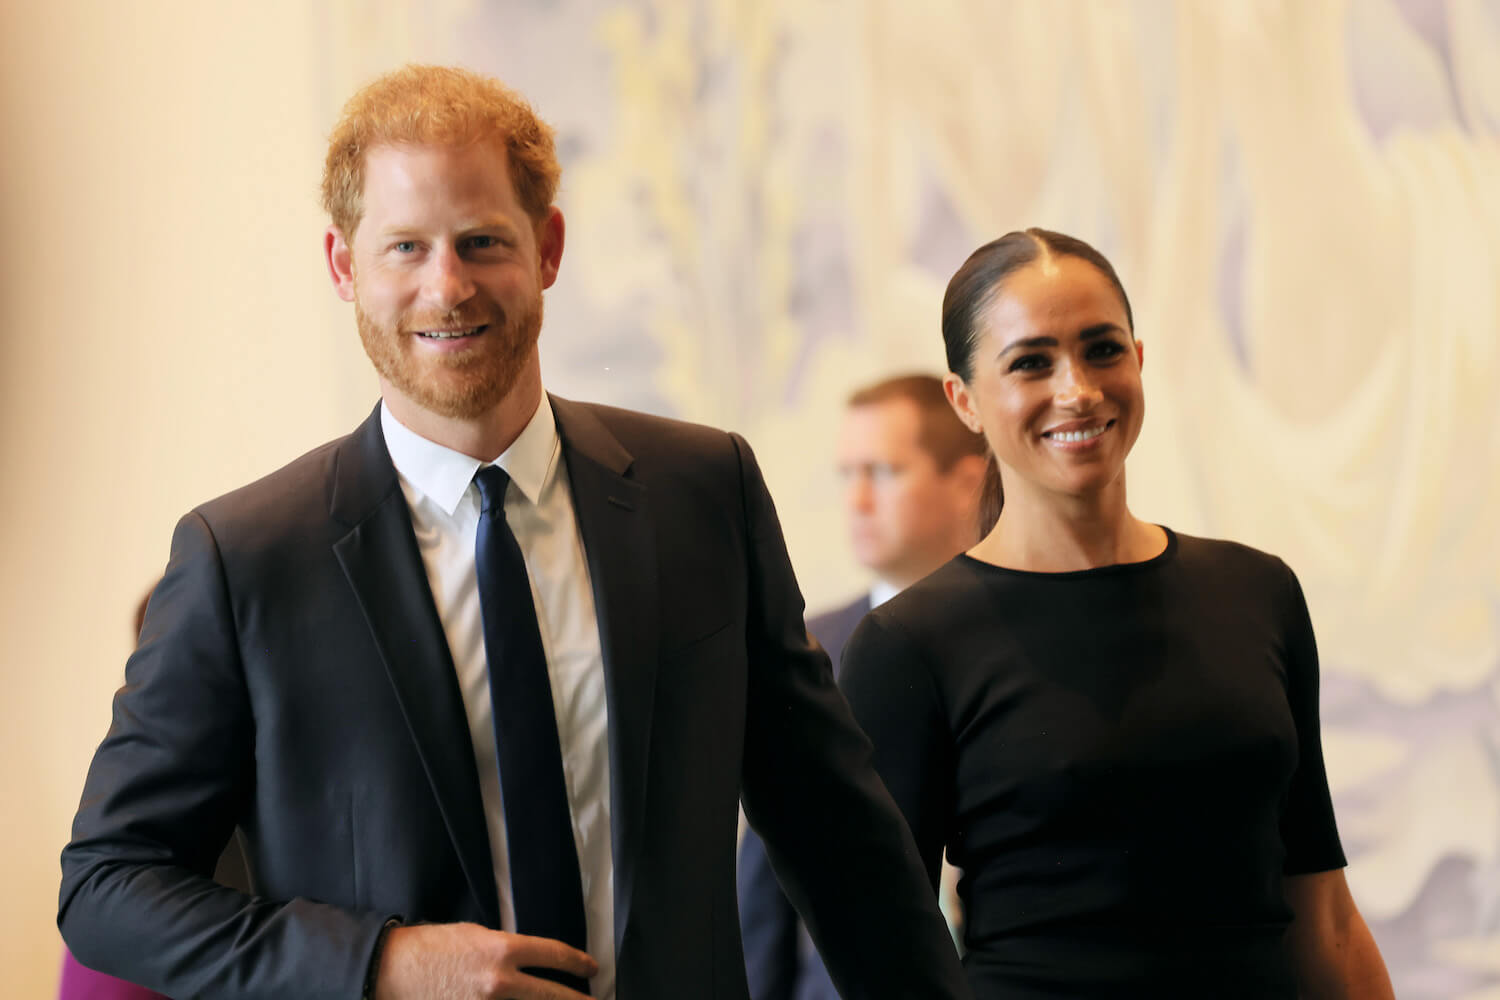 Prince Harry wears a suit and tie and smiles while holding hands with Meghan Markle who wears black and smiles